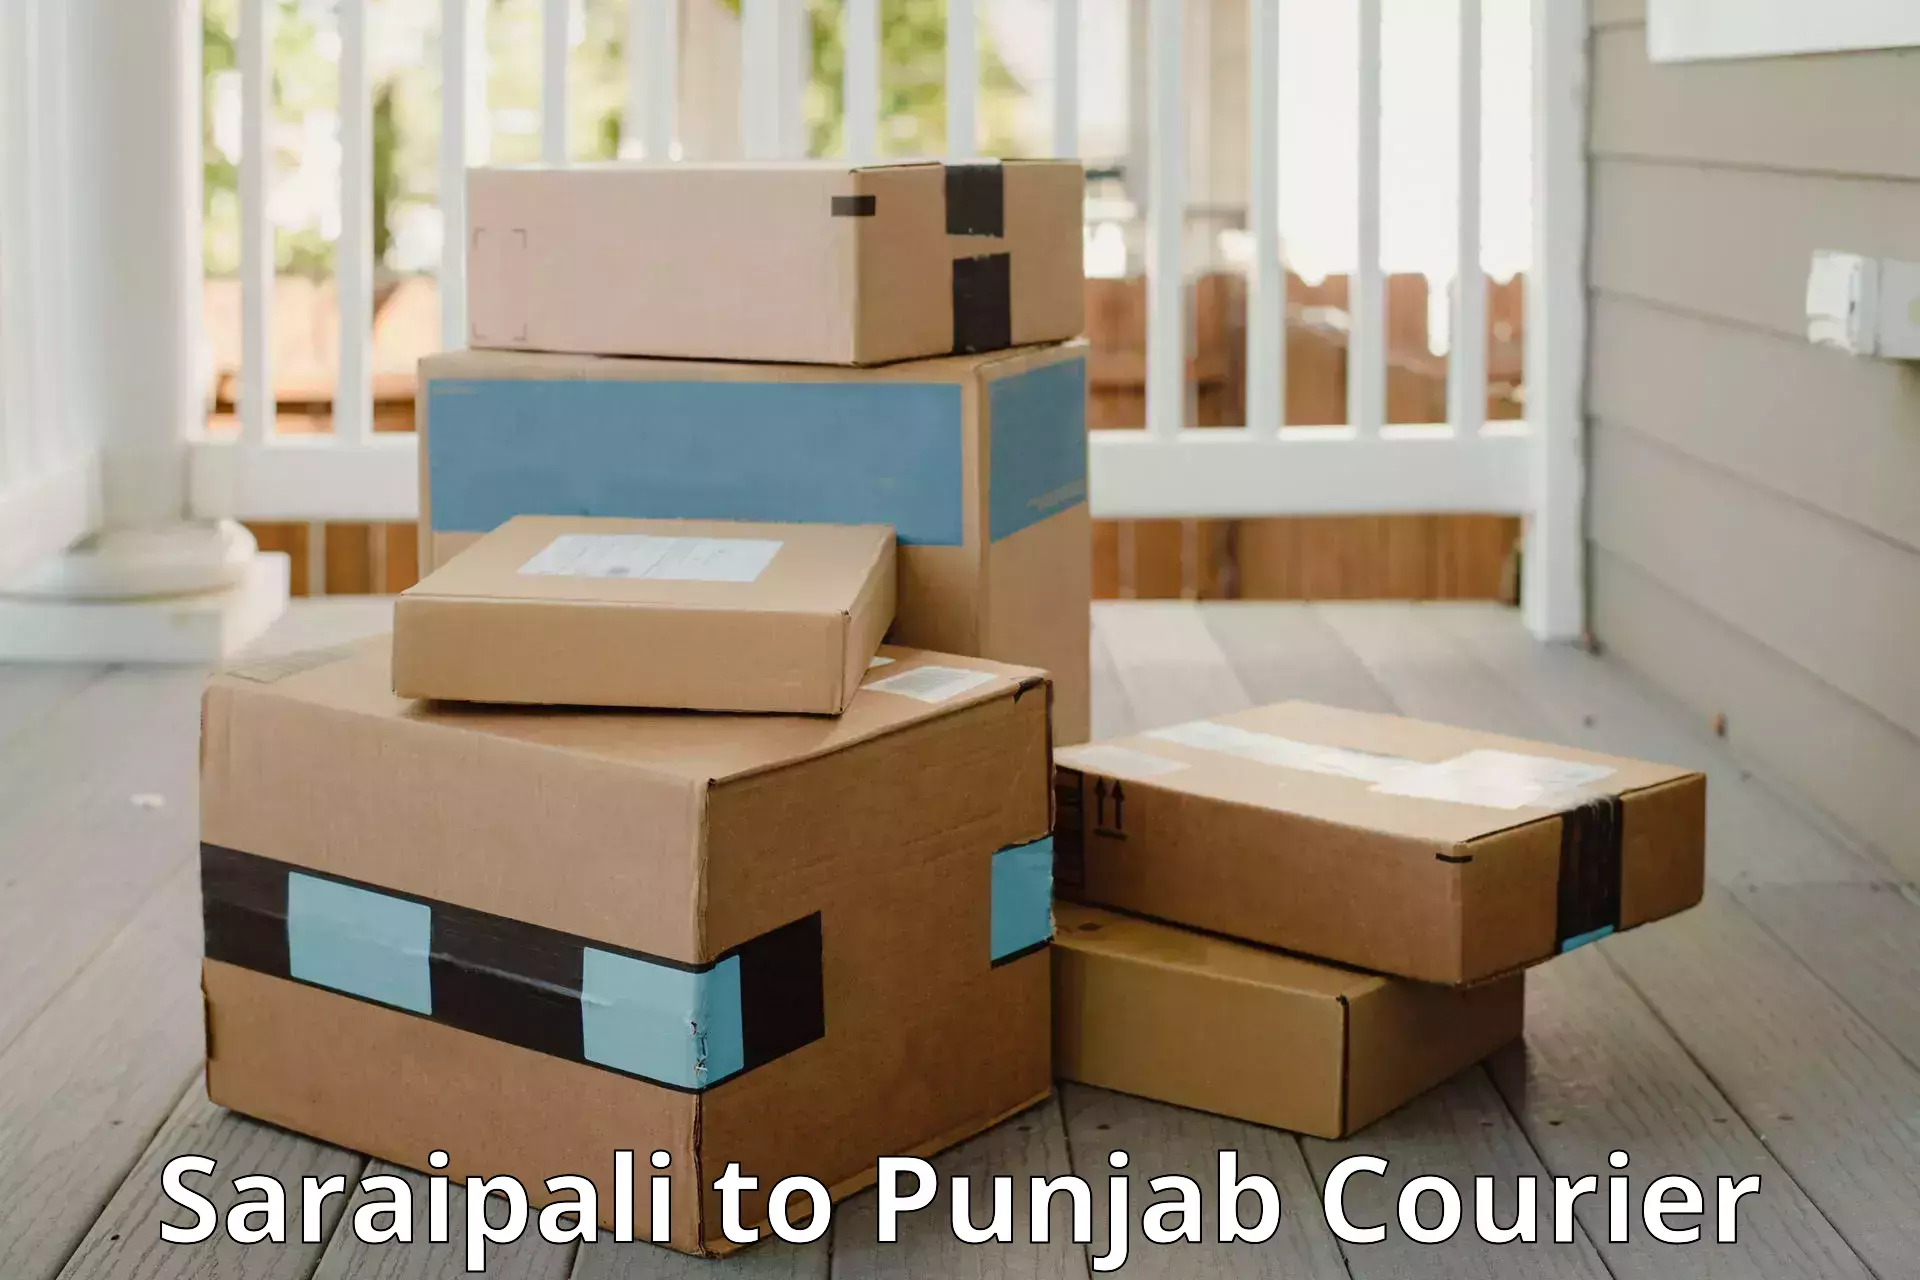 Personal luggage delivery in Saraipali to Jalandhar